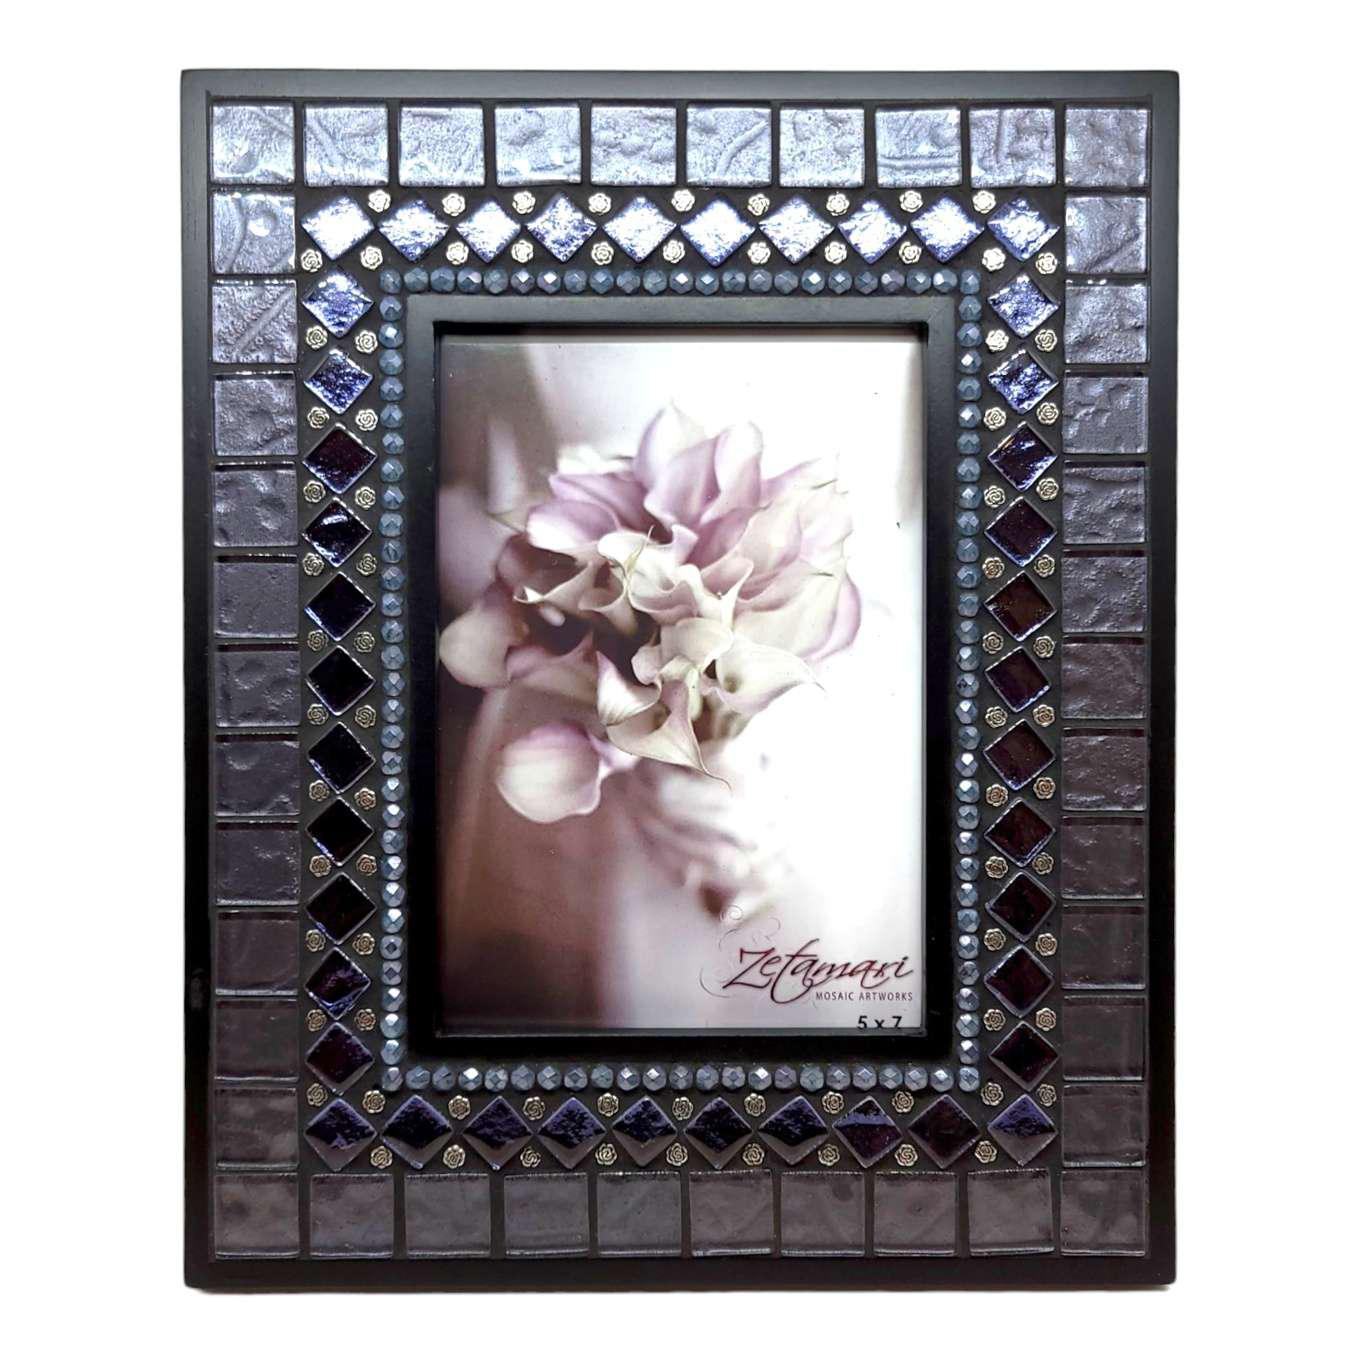 Picture Frame - 5x7in Mosaic Frame in Fairy Dust by Zetamari Mosaic Artworks